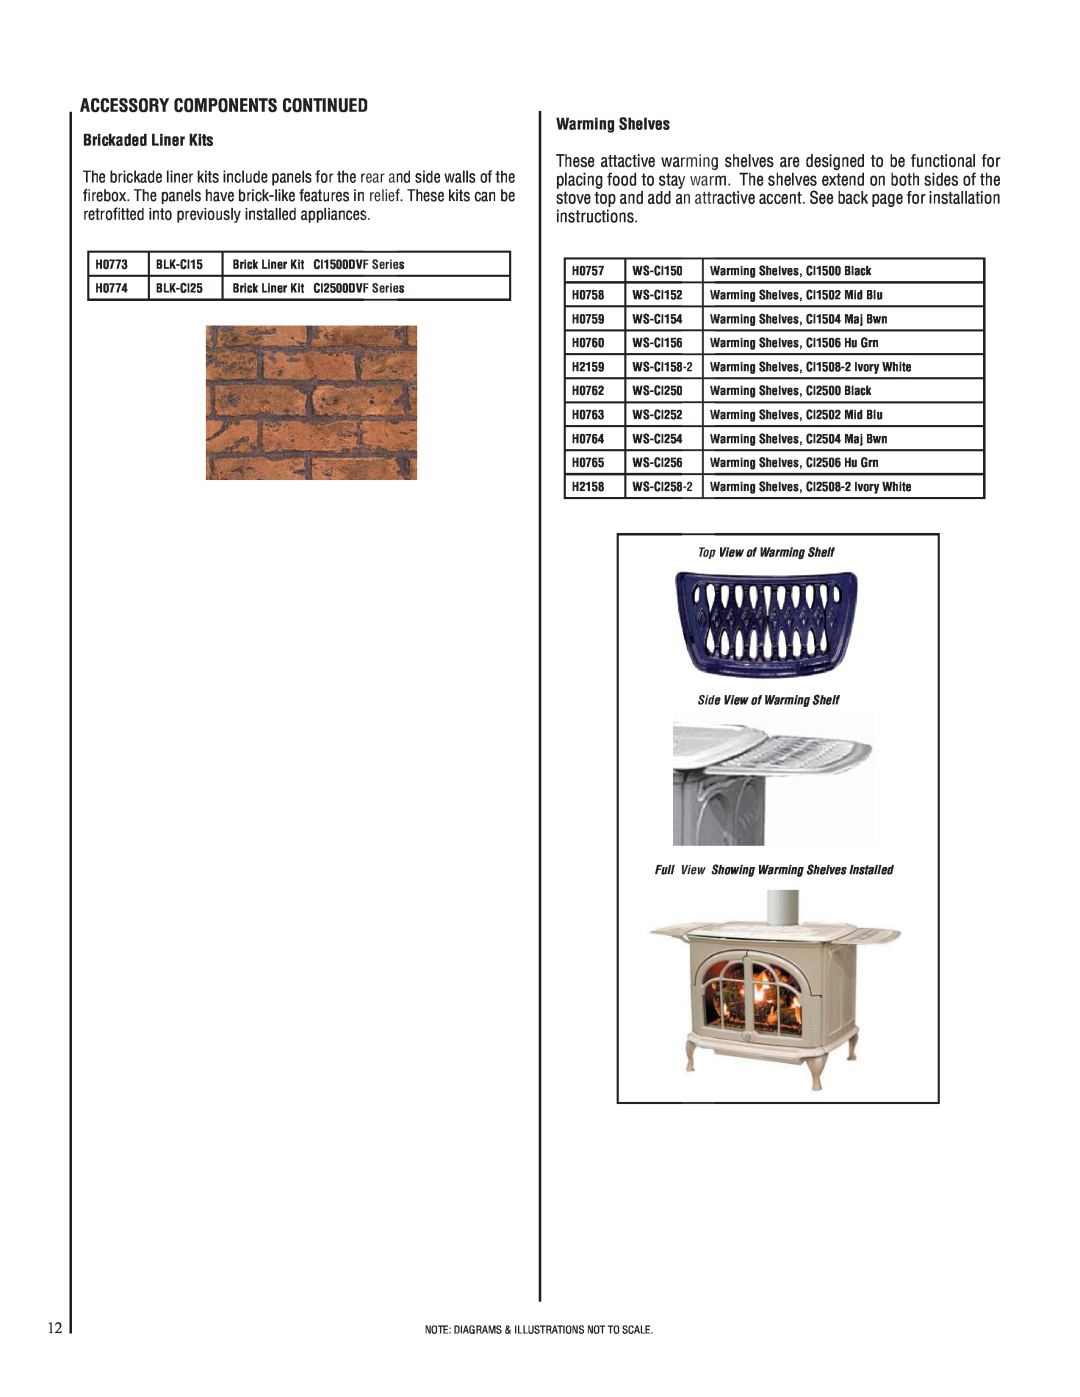 Lennox Hearth CI2500DVF Accessory Components Continued, Brickaded Liner Kits, Warming Shelves, Top View of Warming Shelf 